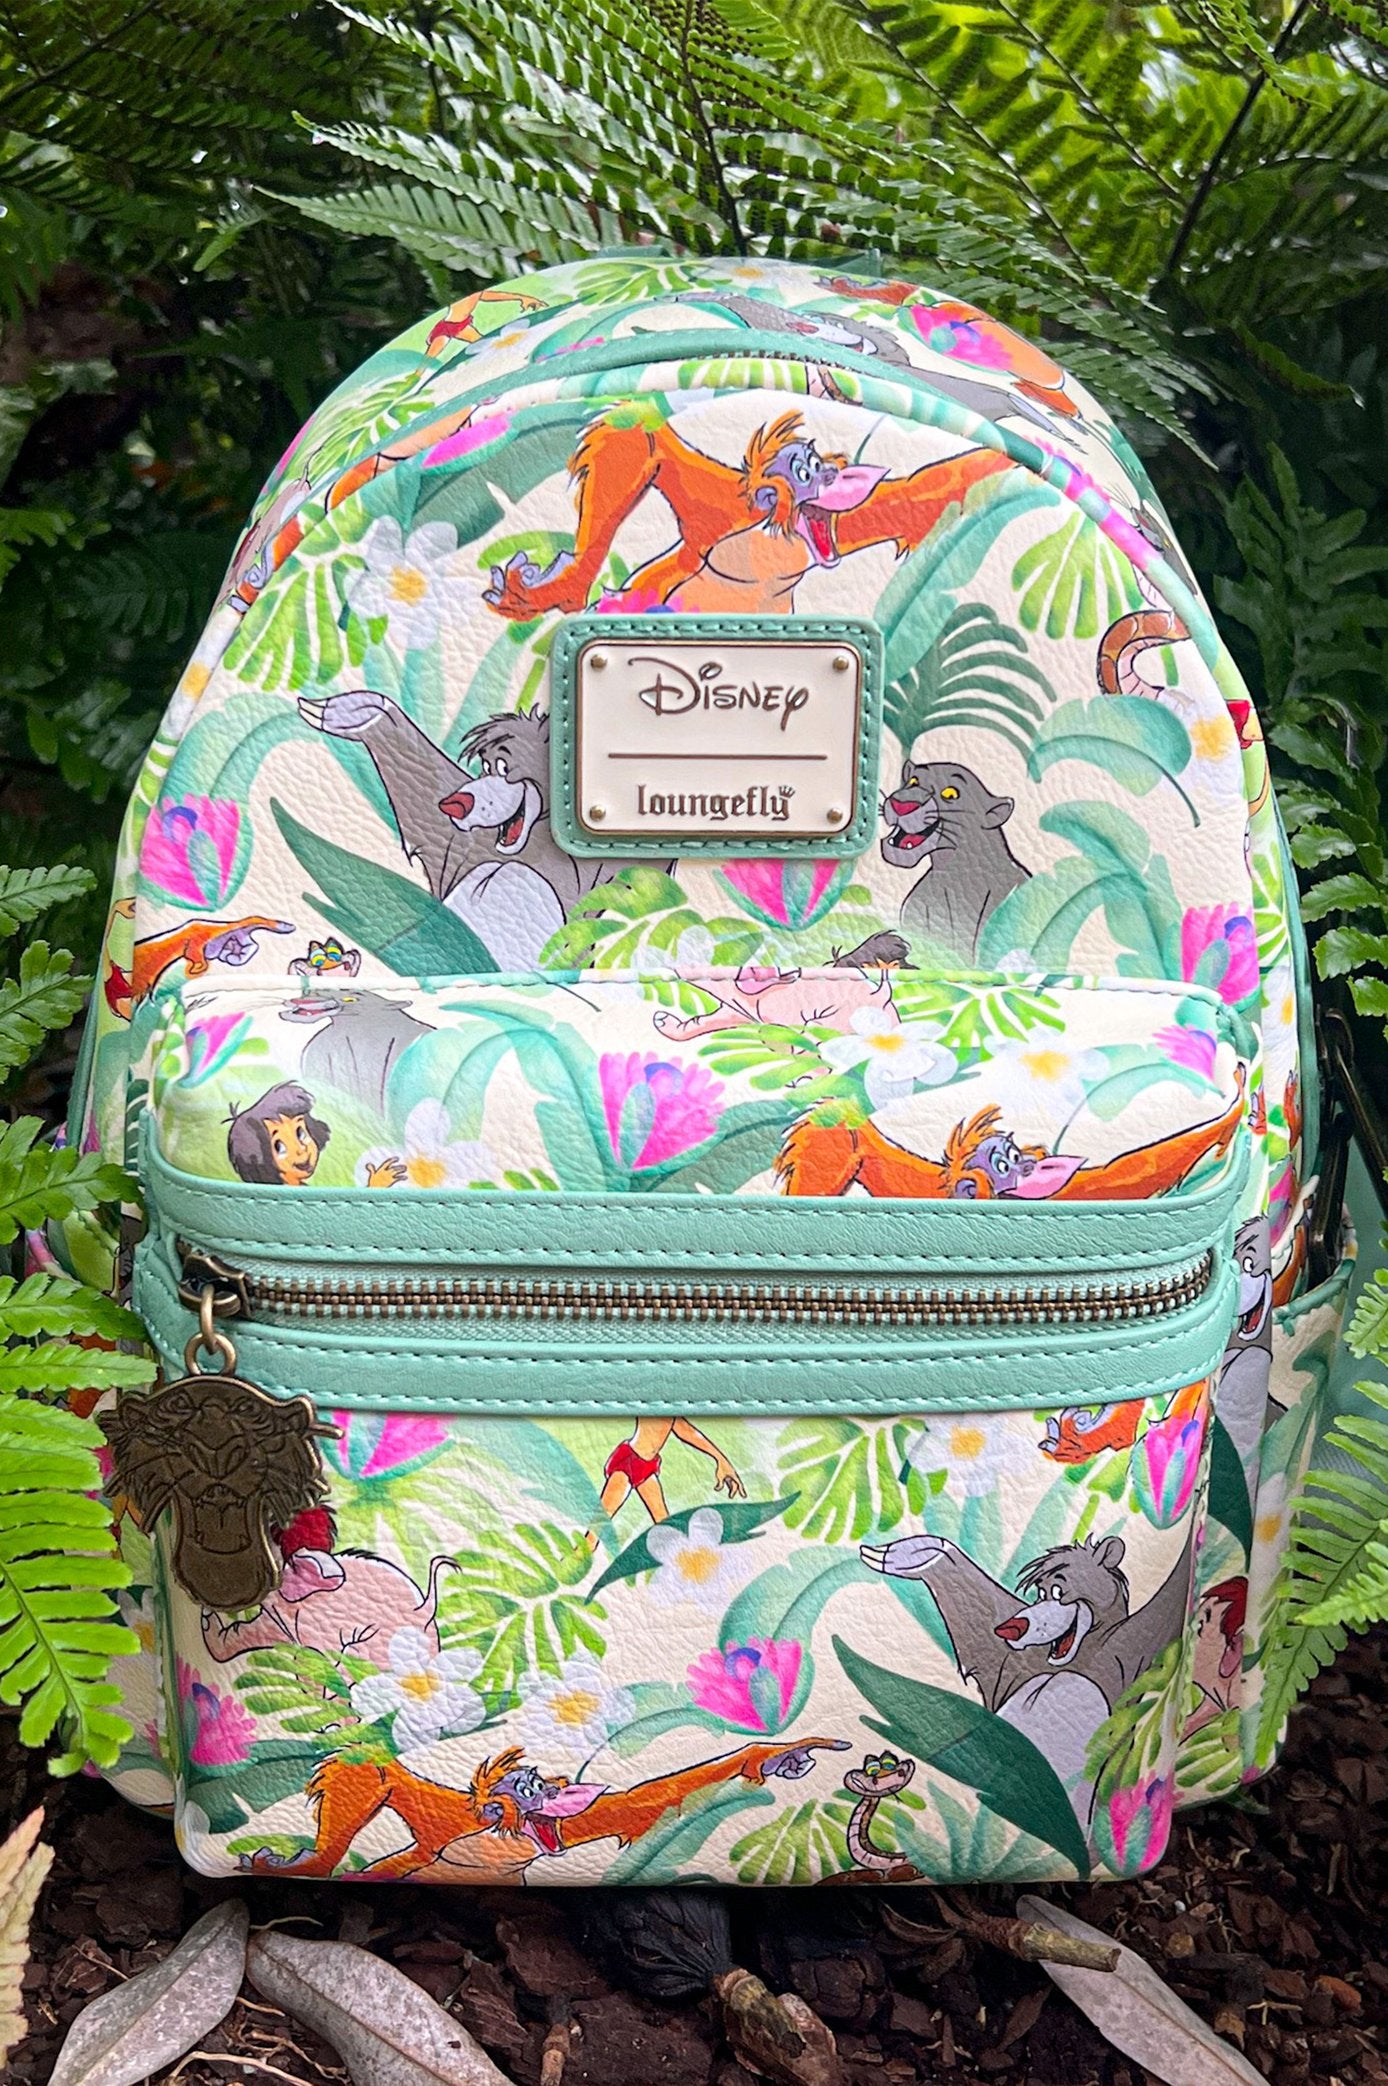 707 Street Exclusive - Loungefly Disney Jungle Book Friends Mini Backpack - IRL Bag Front